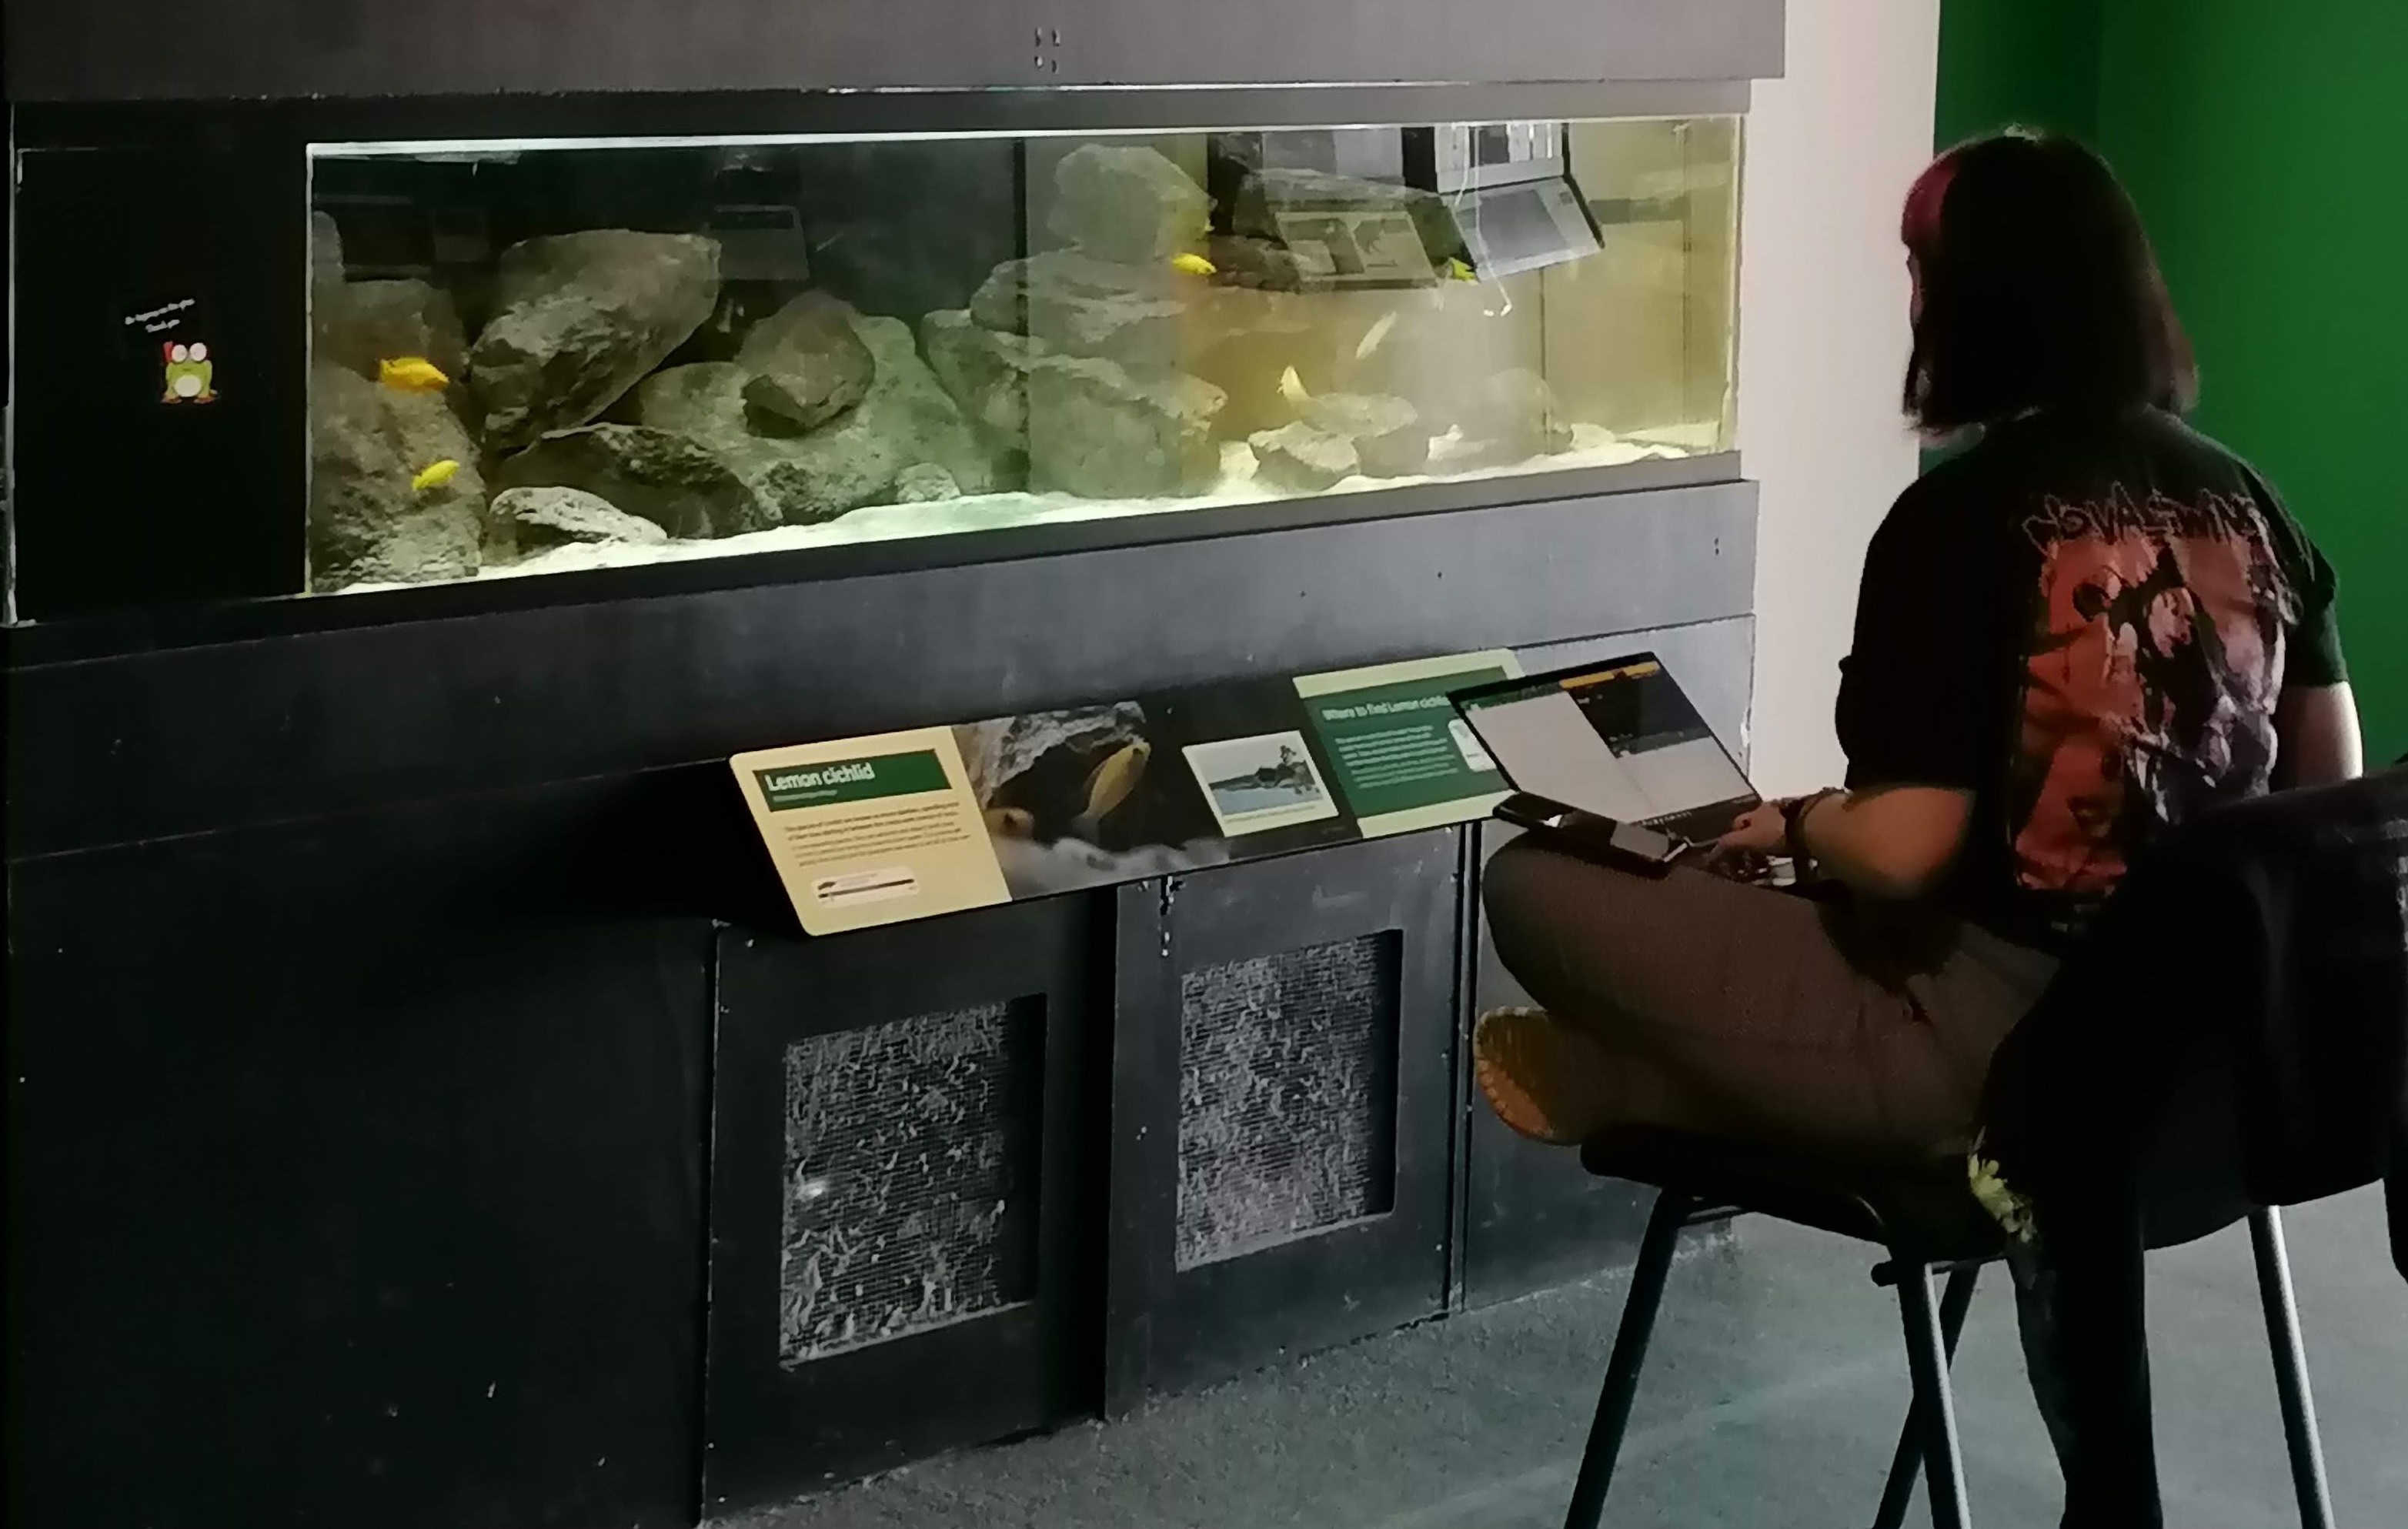 A welfare assessment taking place at a fish habitat